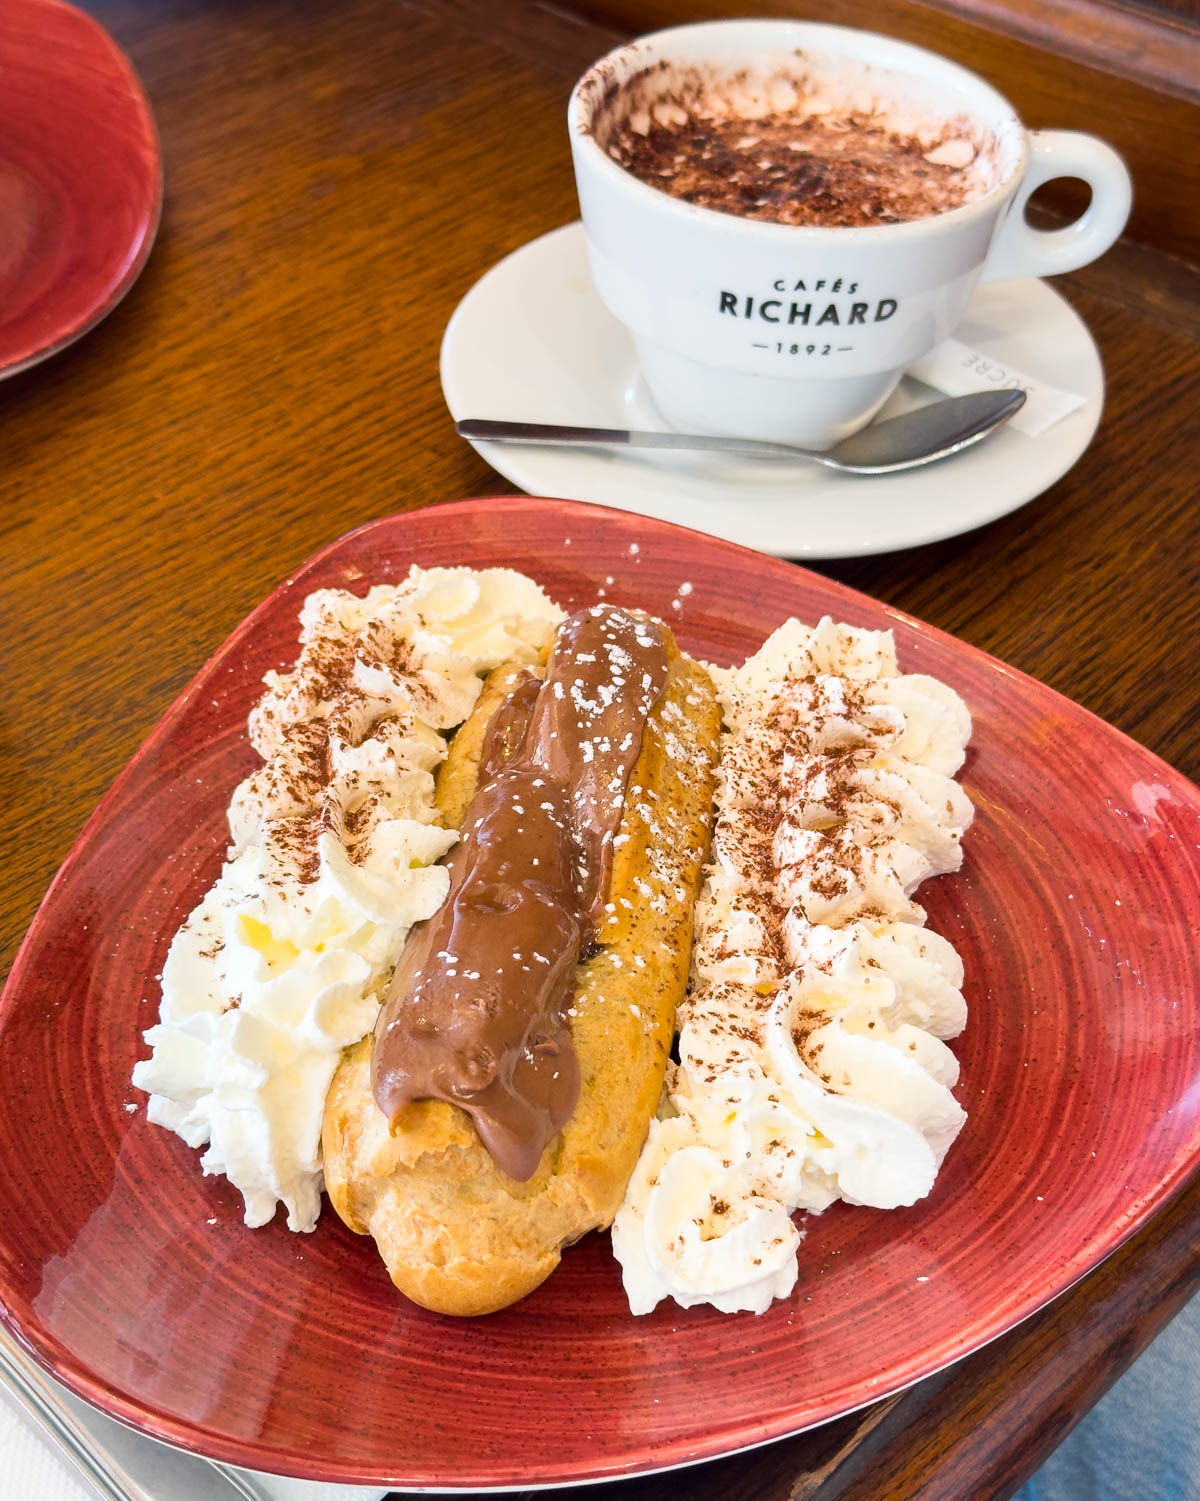 A plate with an eclair in the middle of two strips of whipped cream. A mug of hot cocoa on the side.